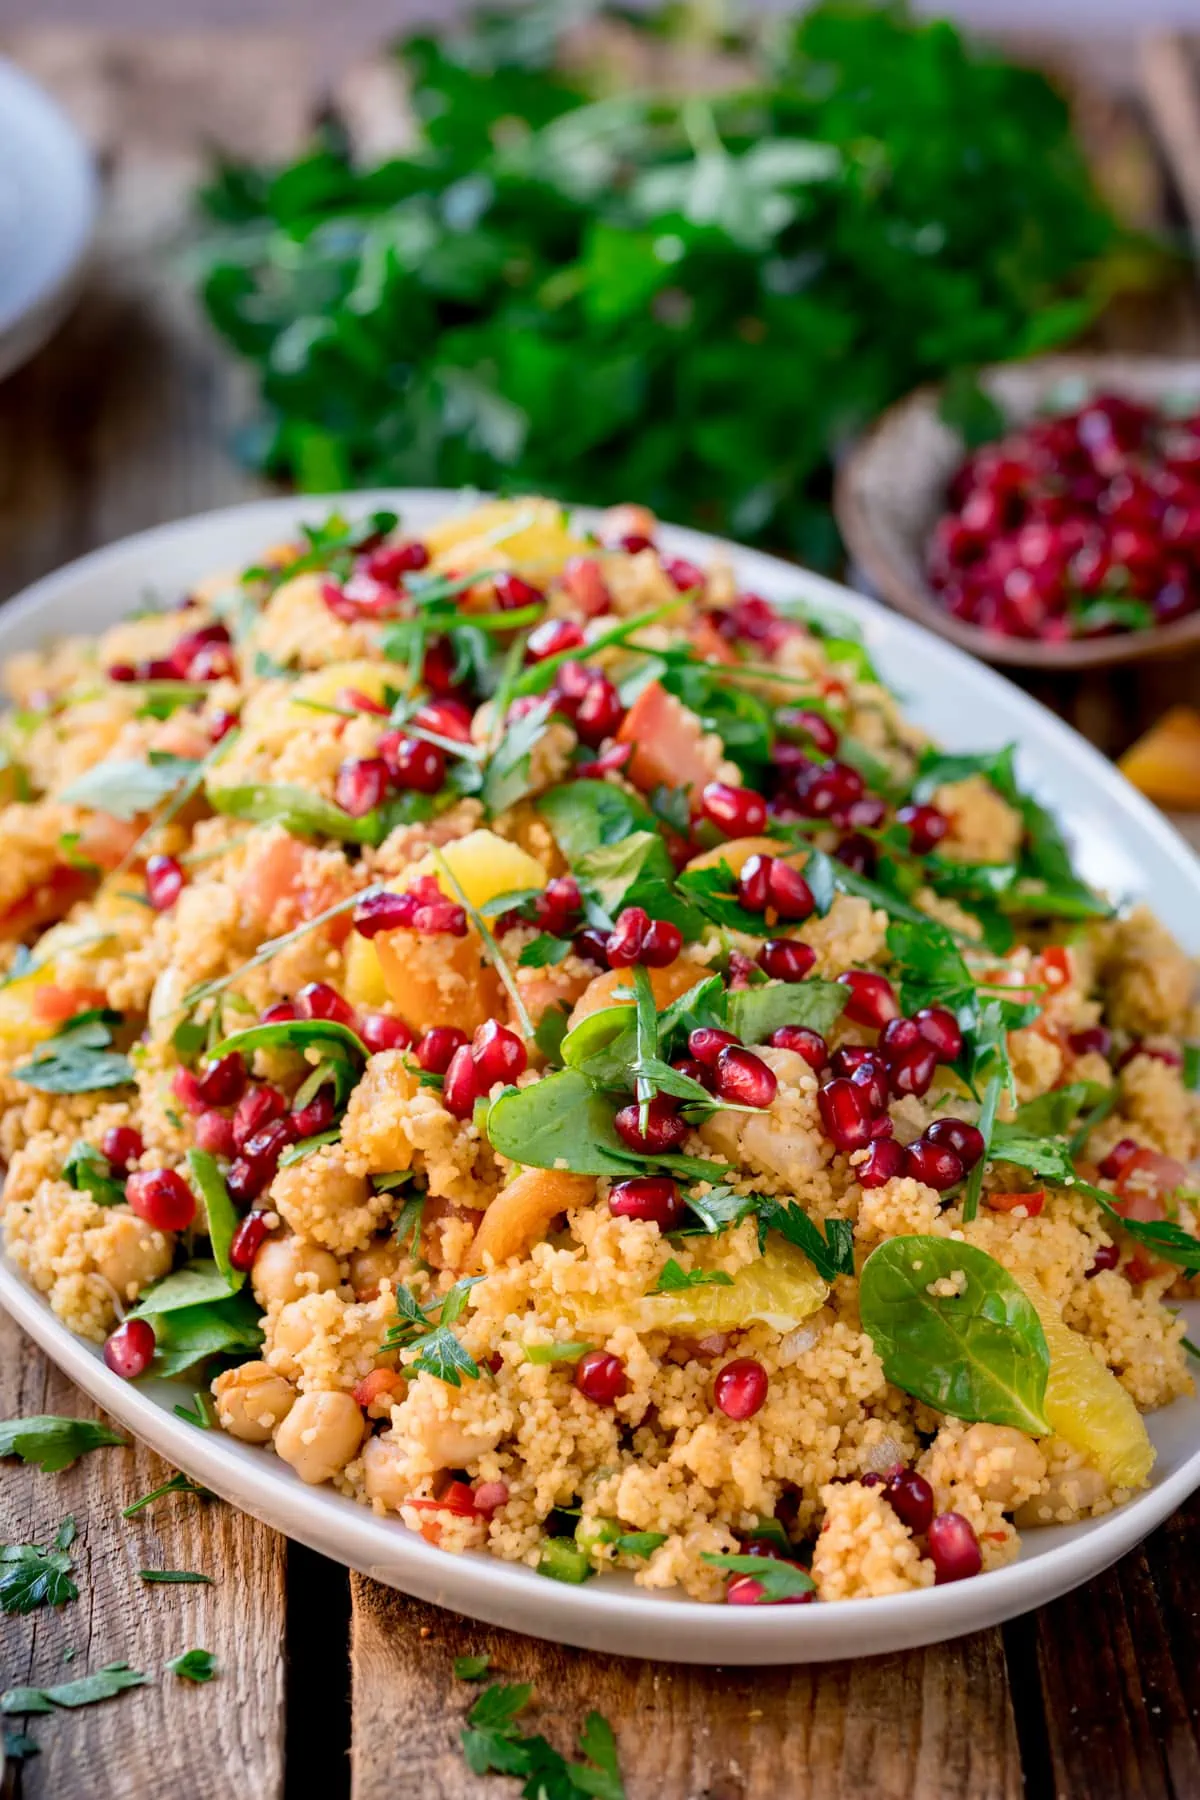 Side image of a large oval serving dish filled with Moroccan-style couscous, topped with herbs and pomegranate. The plate is on a wooden table and there are fresh herbs and a small bowl of pomegranate in the background.